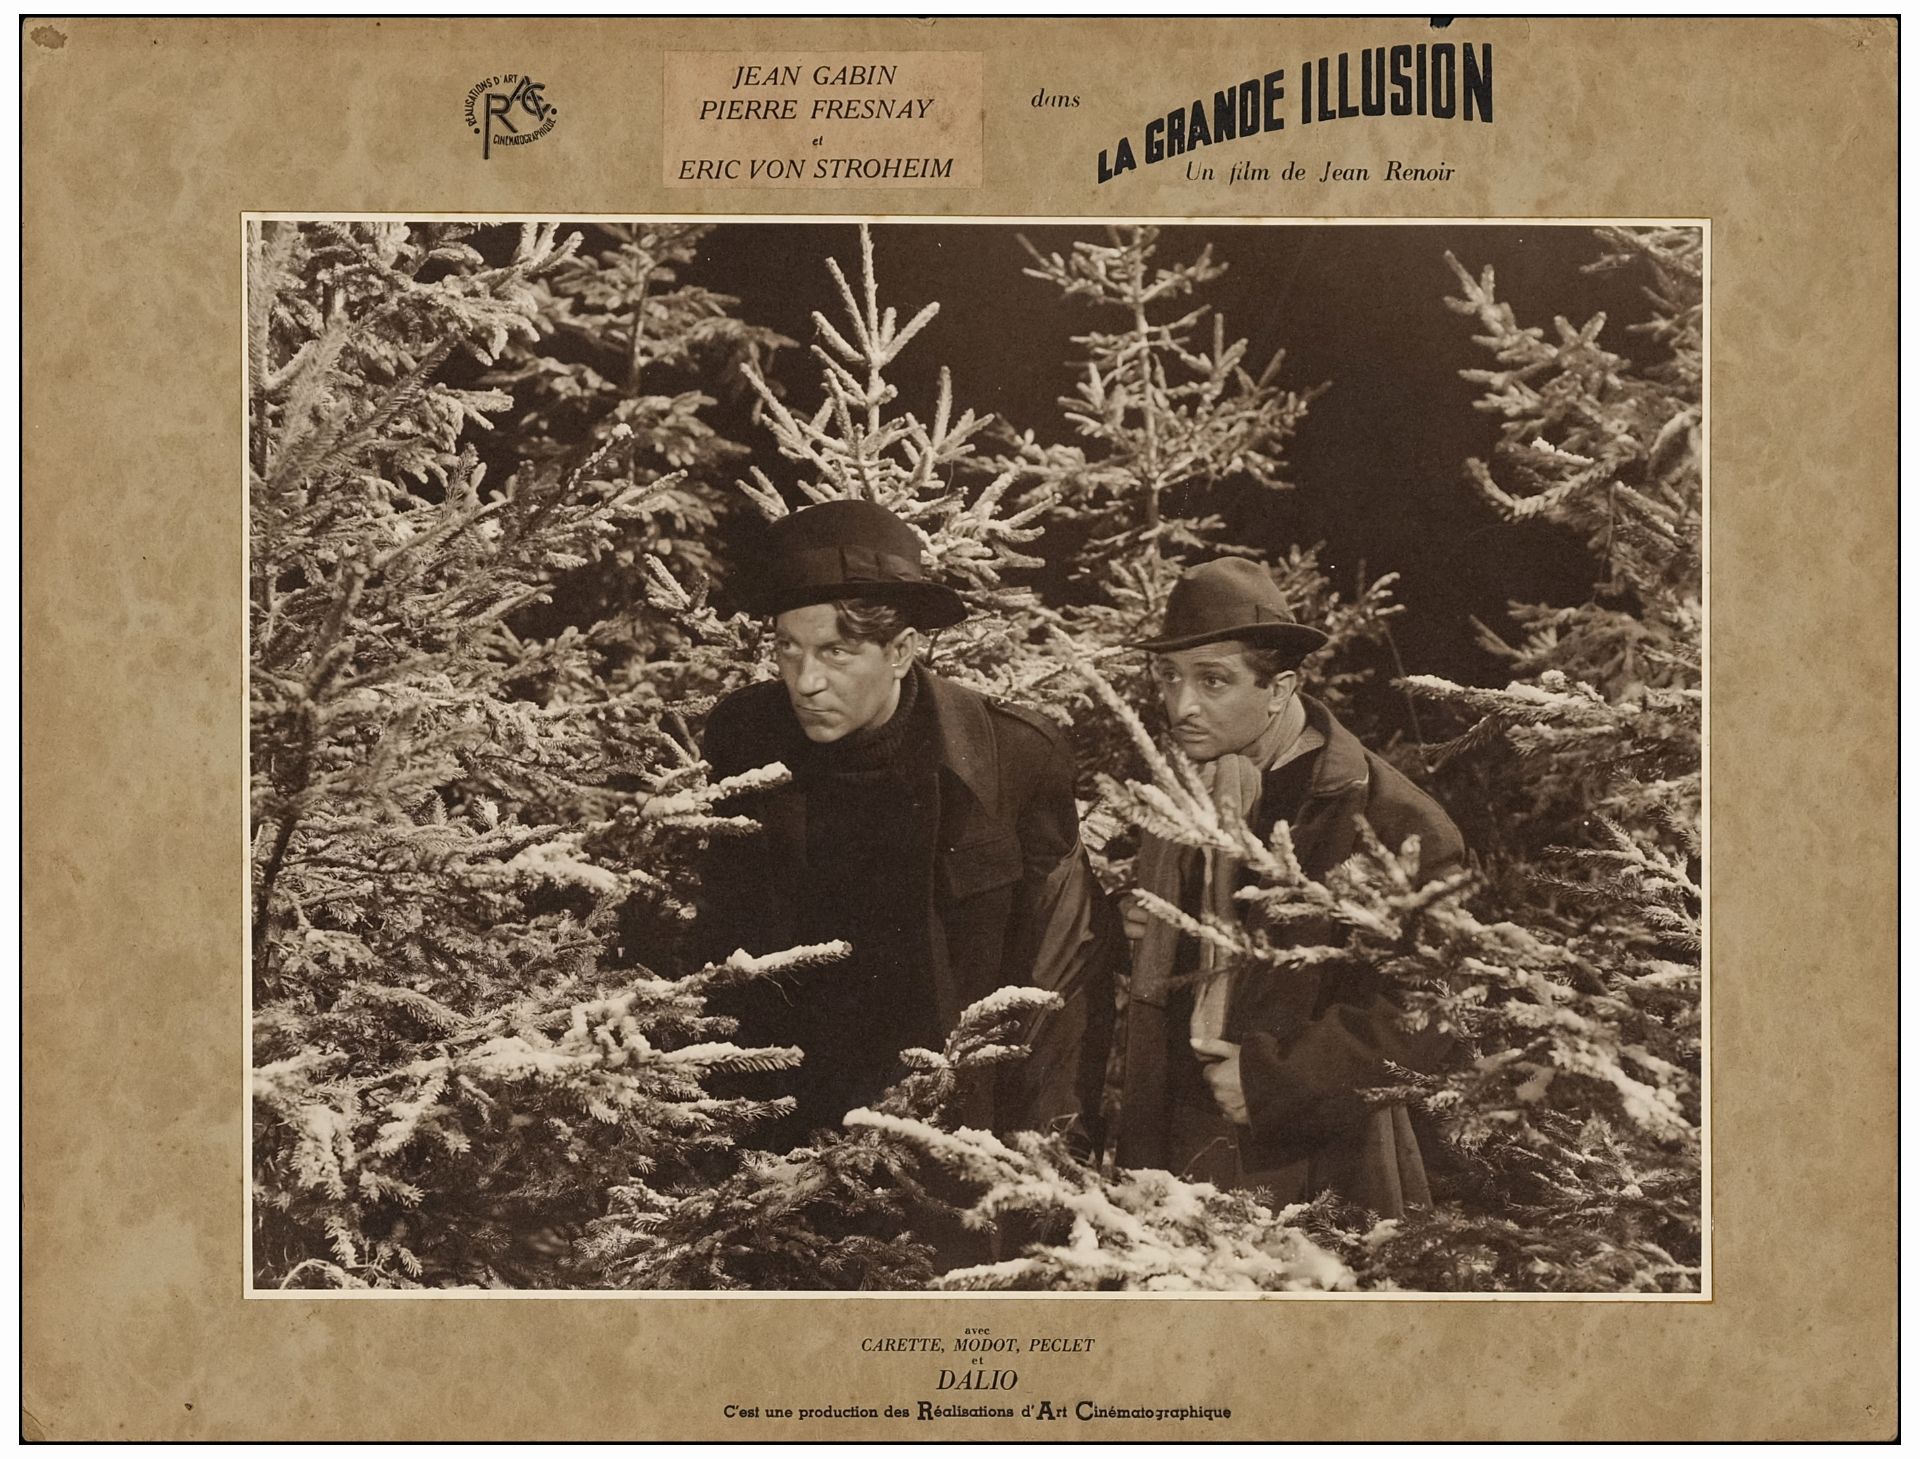 THE GRAND ILLUSION - French Lobby Card (15" x 19.5" ); Fine-